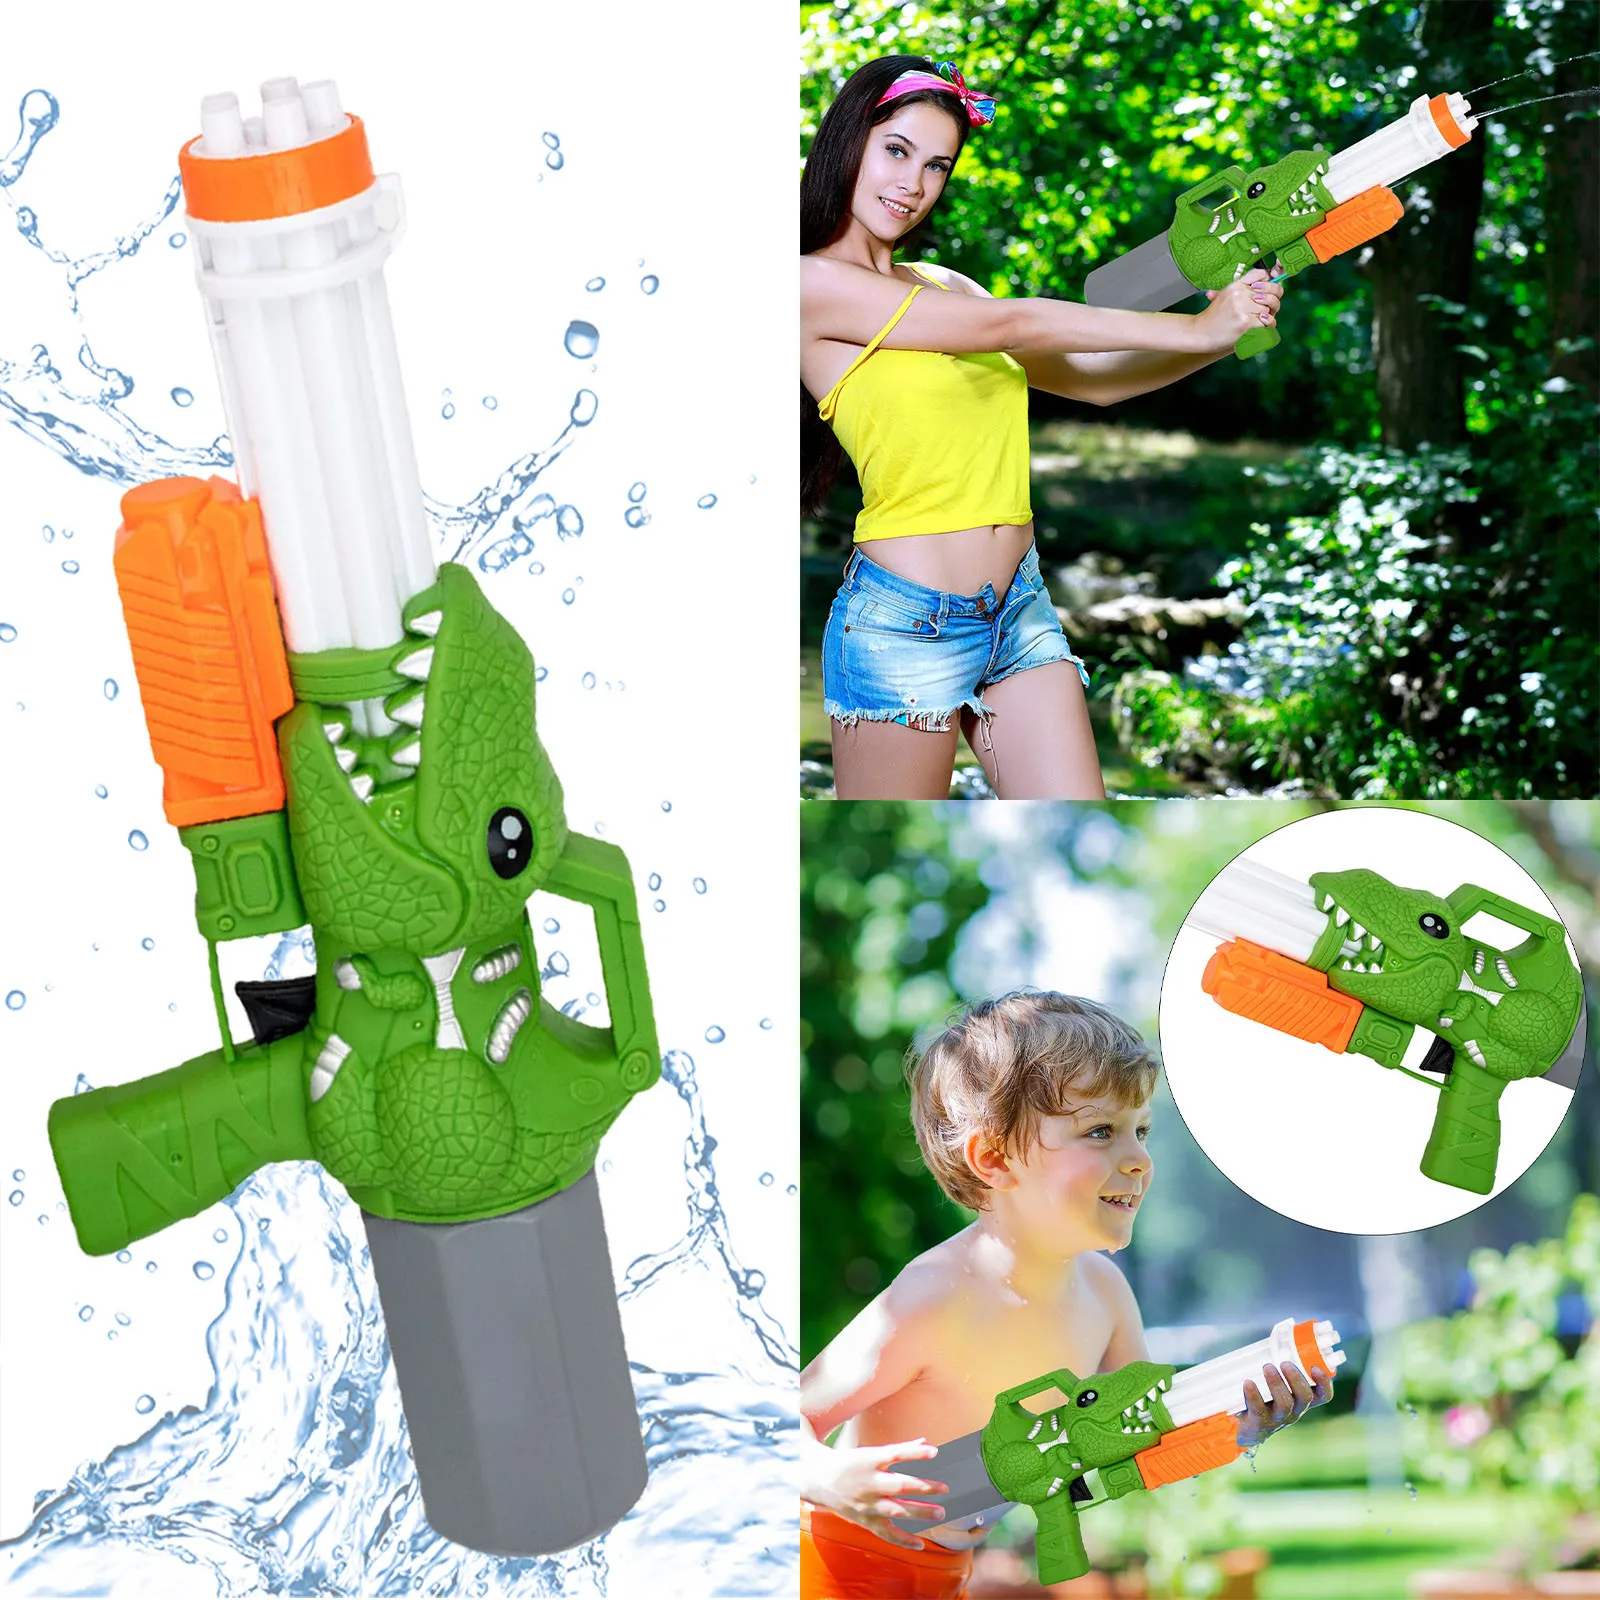 

Kids Dinosaur Water Guns Super Water Blaster Soaker Squirt Blaster Guns With Toy Gifts For Boys Girls Summer Fun Summer for Pool